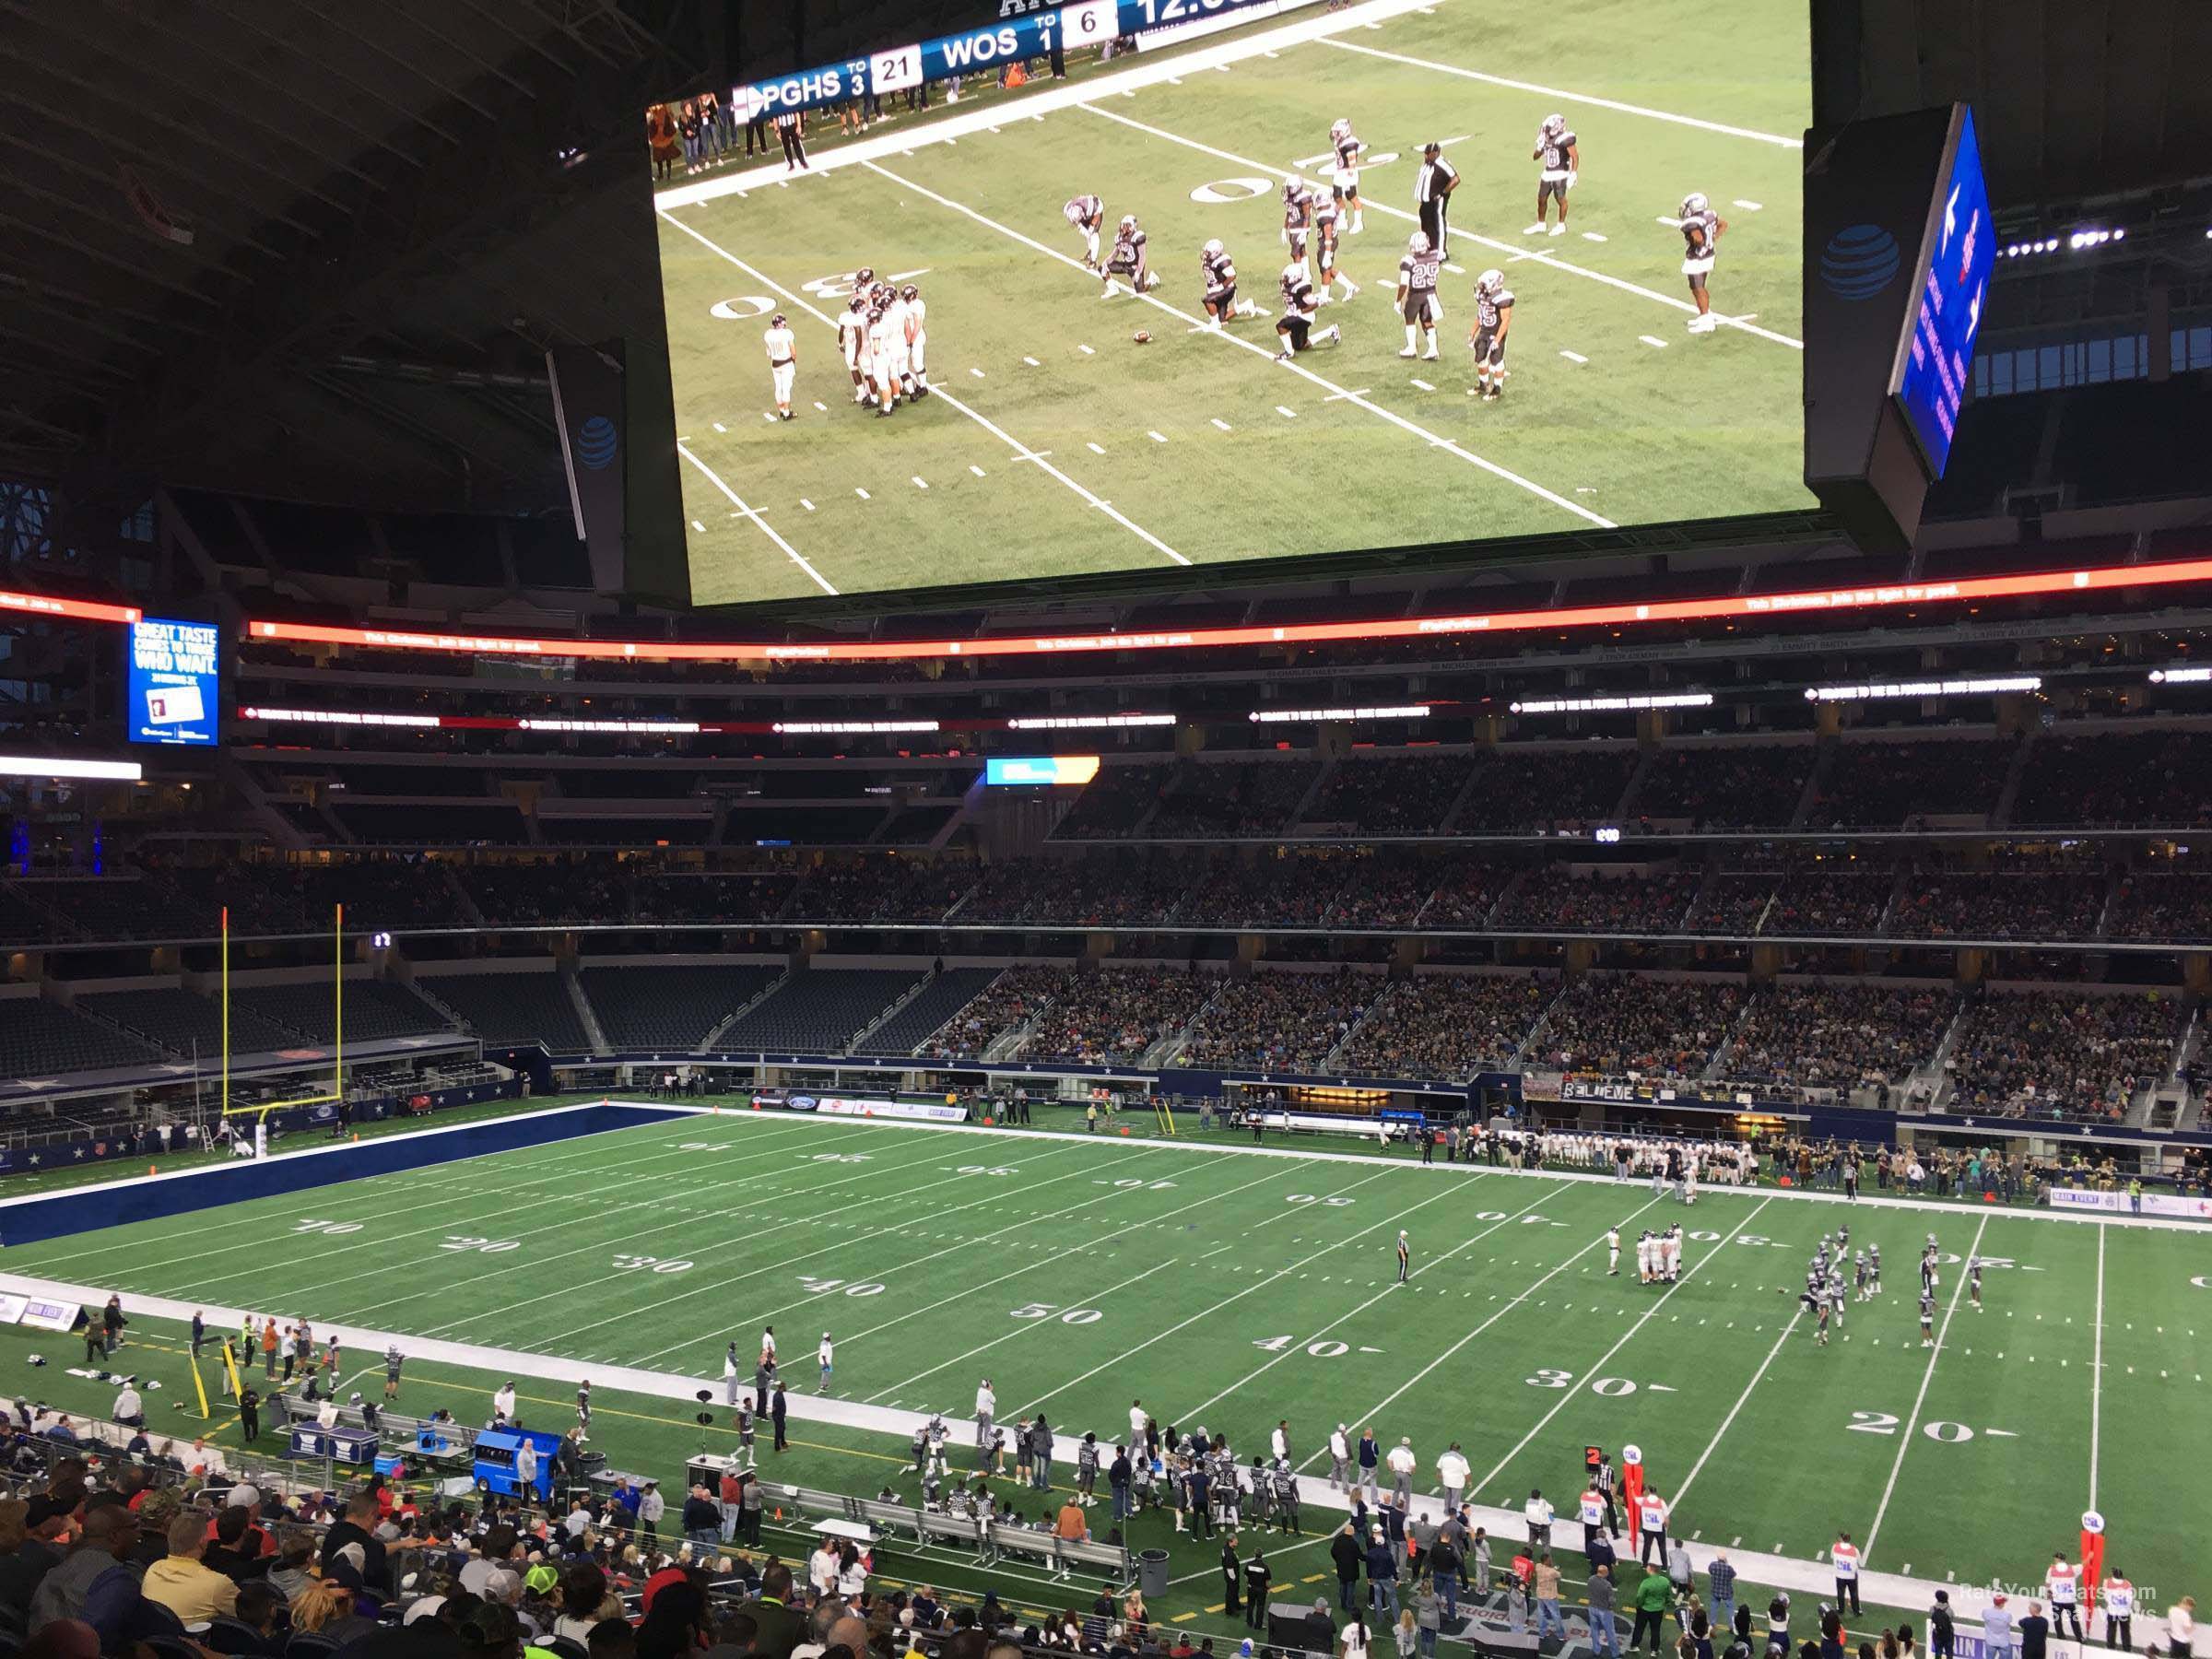 Section C207 at AT&T Stadium 